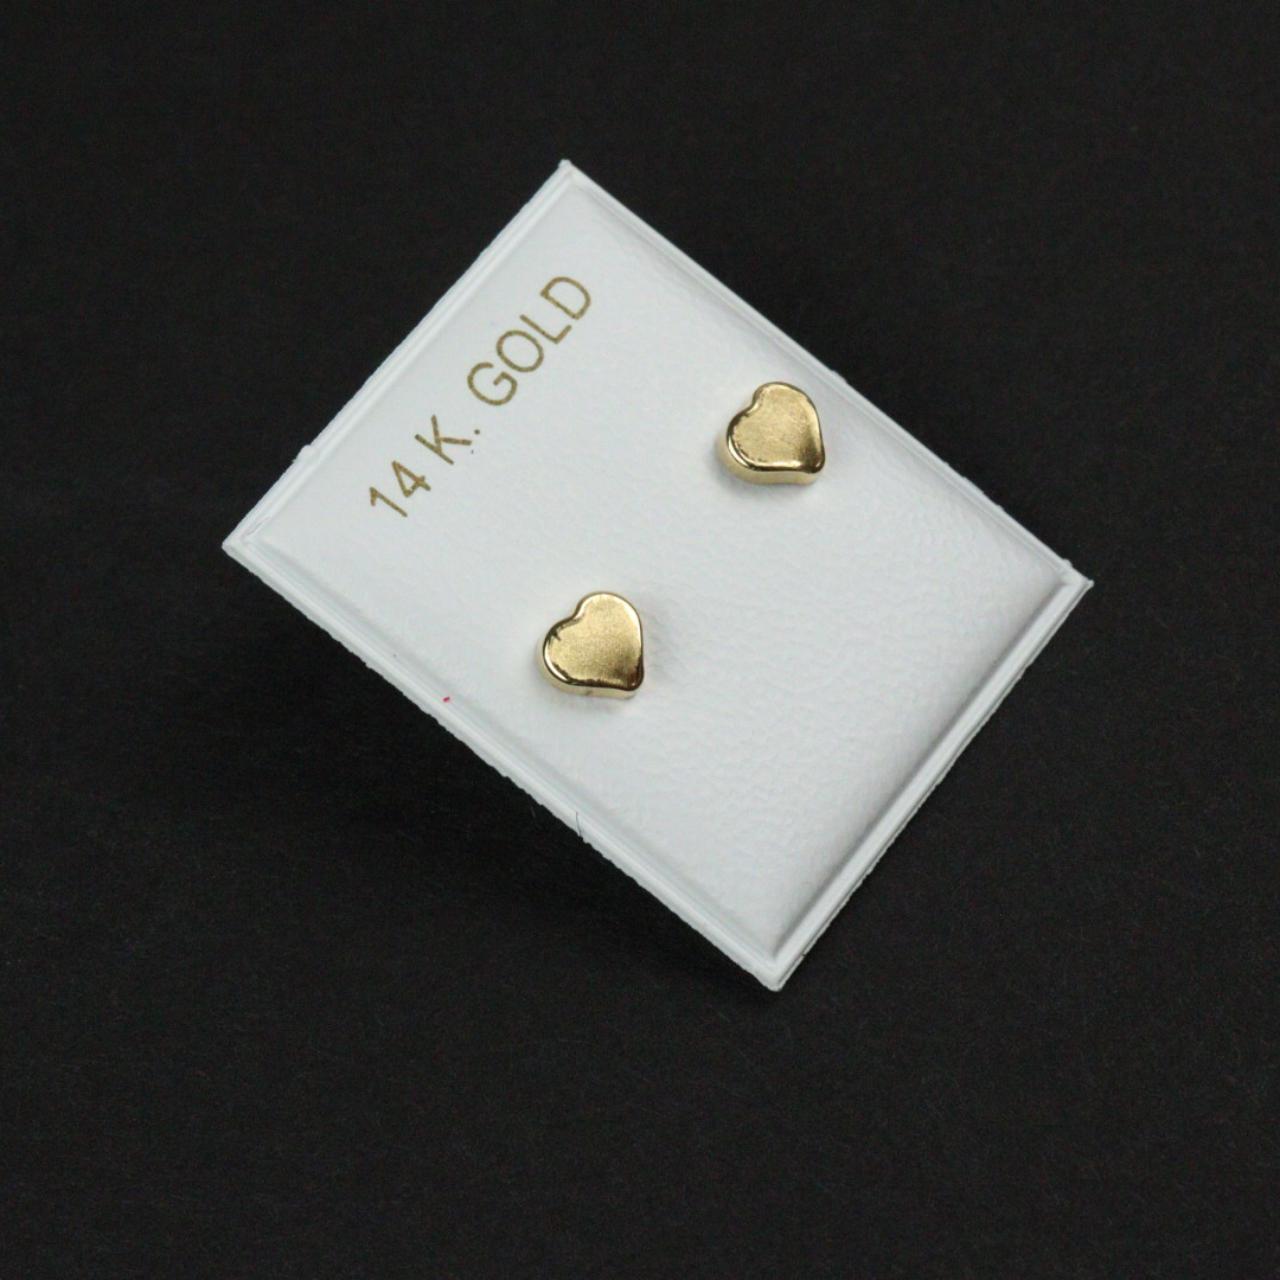 Product Image 3 - Heart shaped 14k solid gold